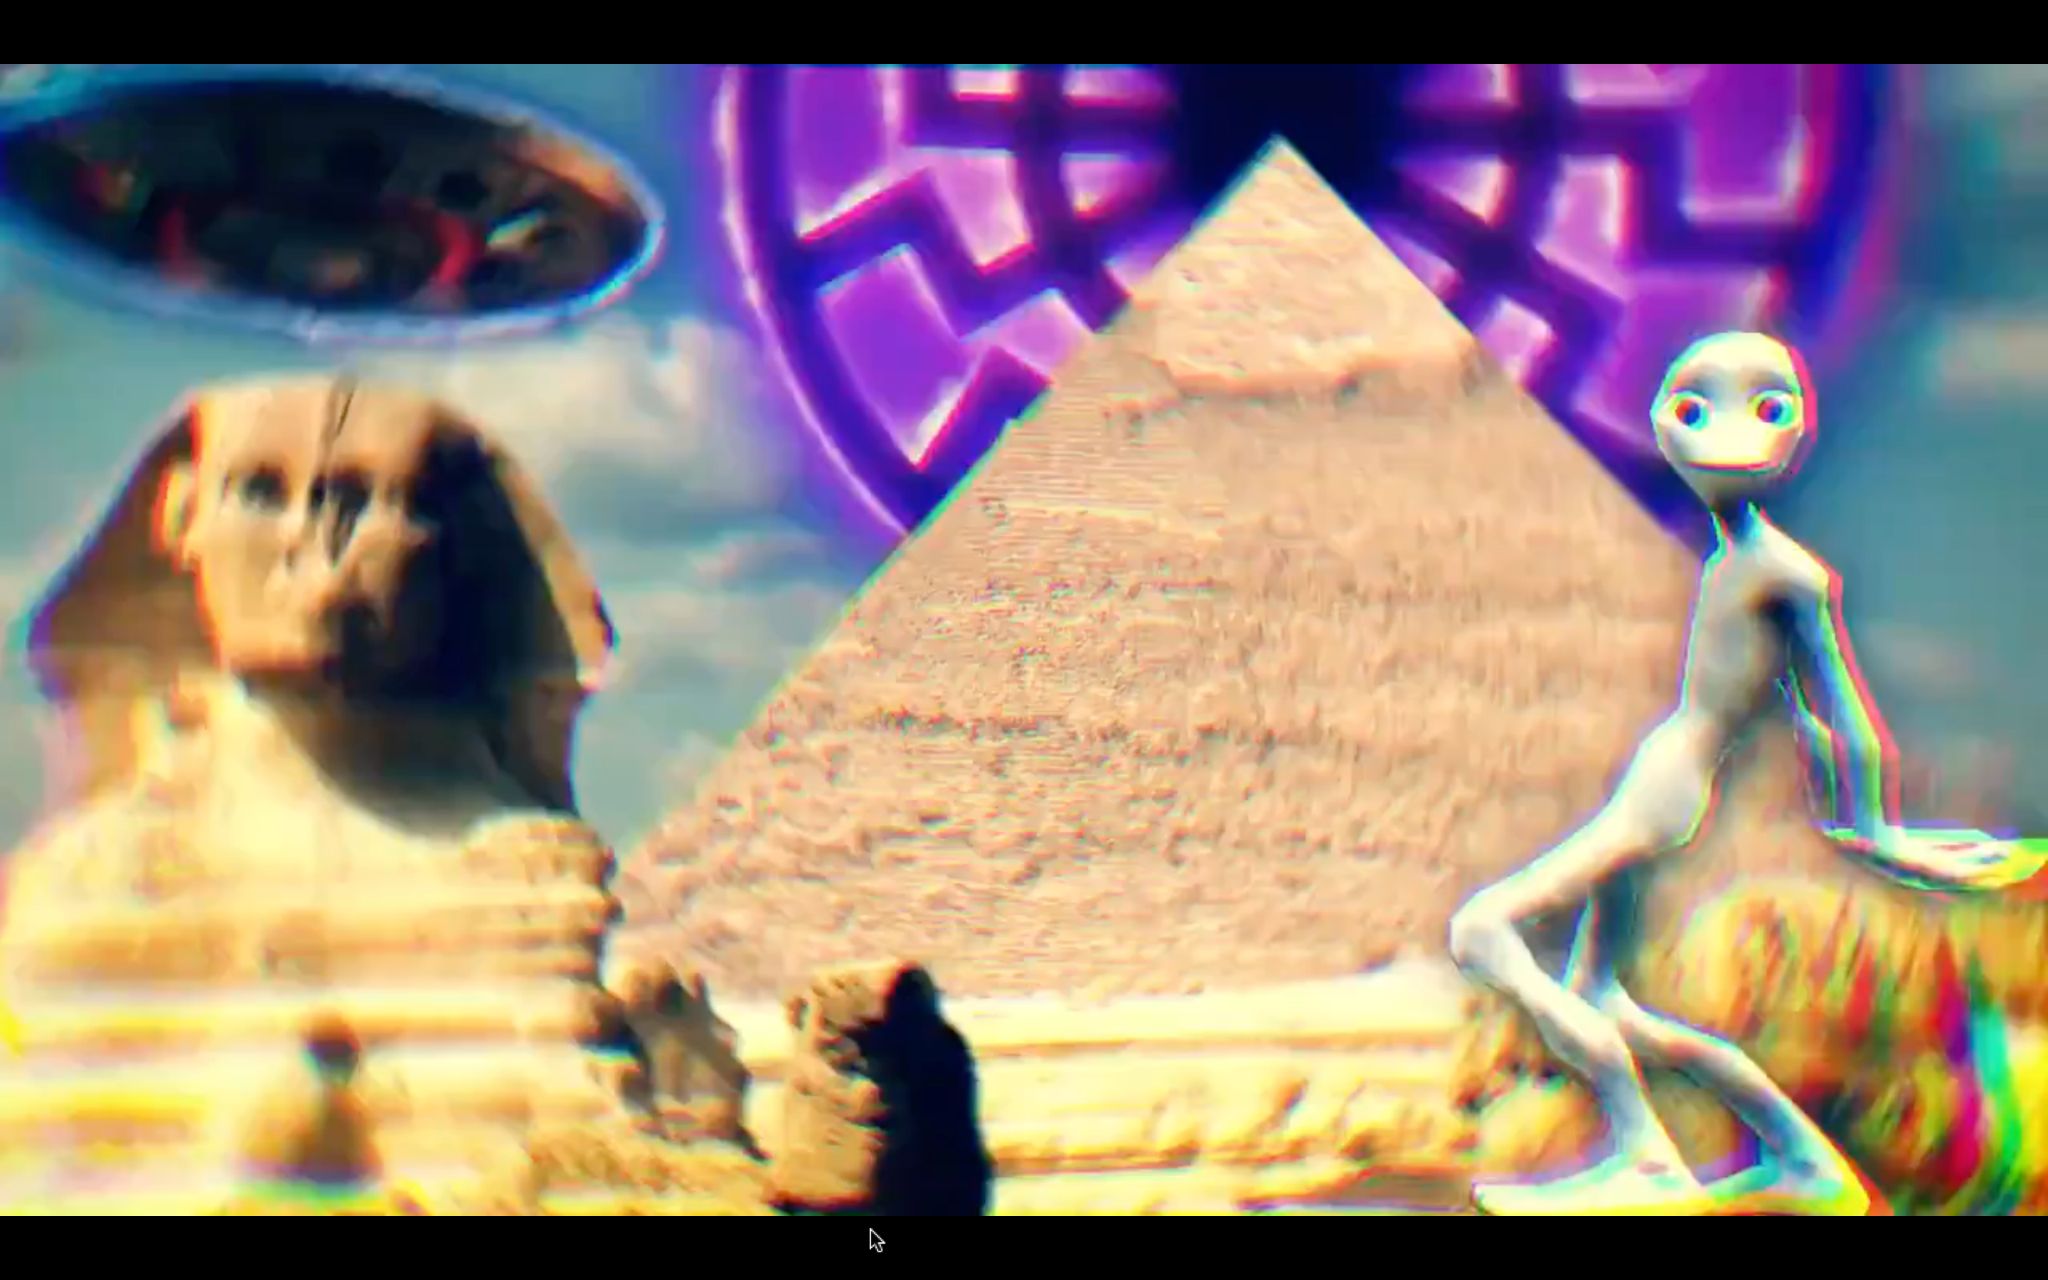 A dancing alien next to the Sphinx. At the back, a pyramid surrounded by the Nazi sonnenrand symbol and a UFO.